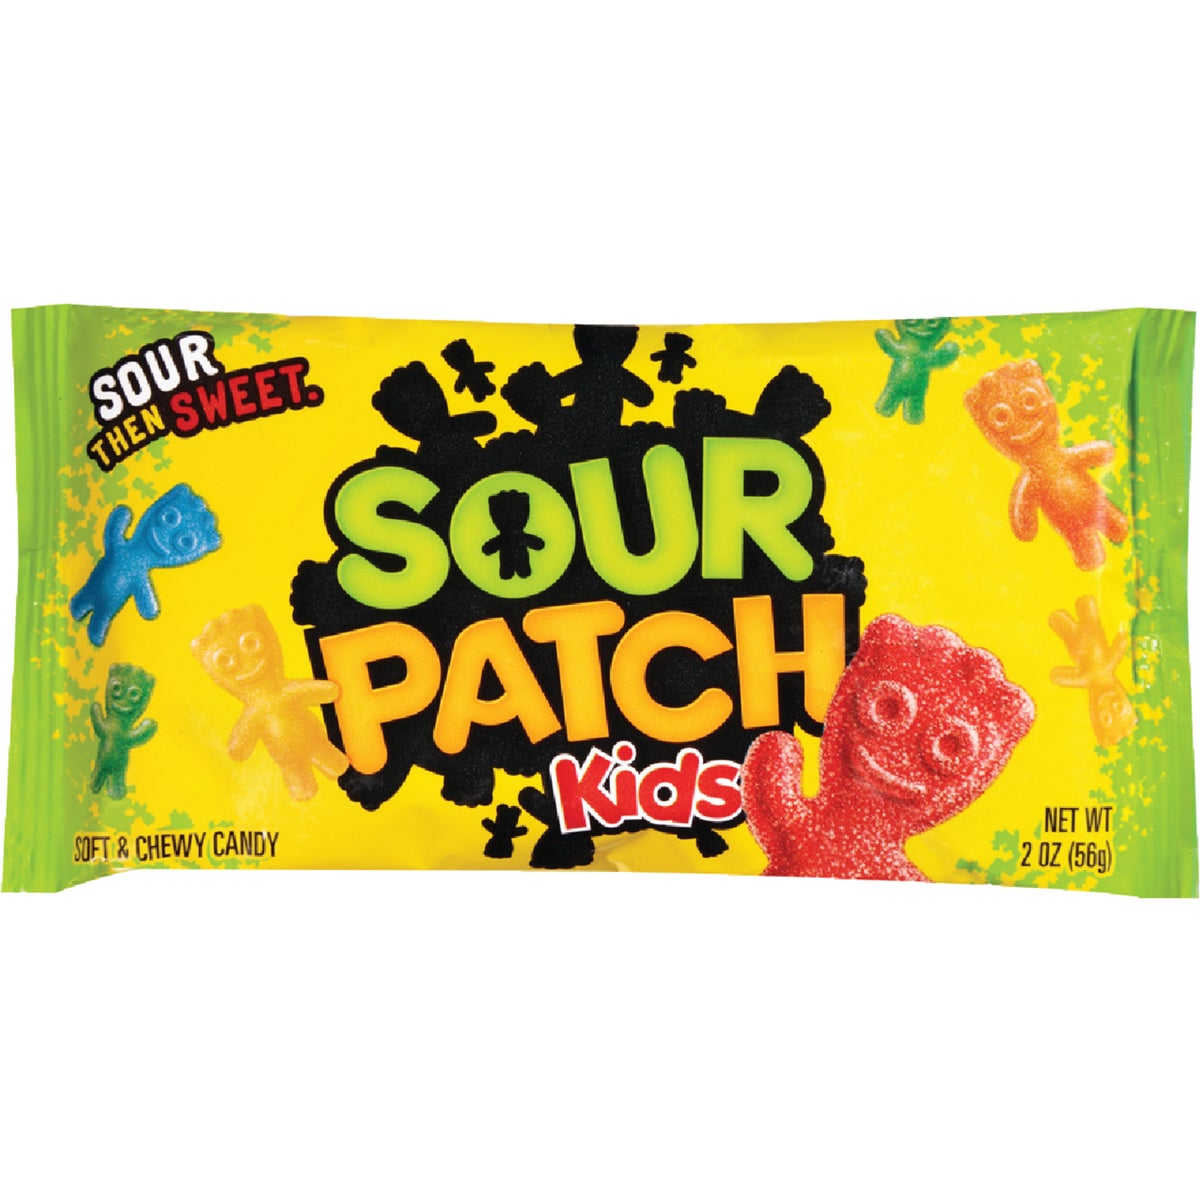 Item 970540, Sour Patch Kids soft and chewy candy. Convenient single serving pouch.